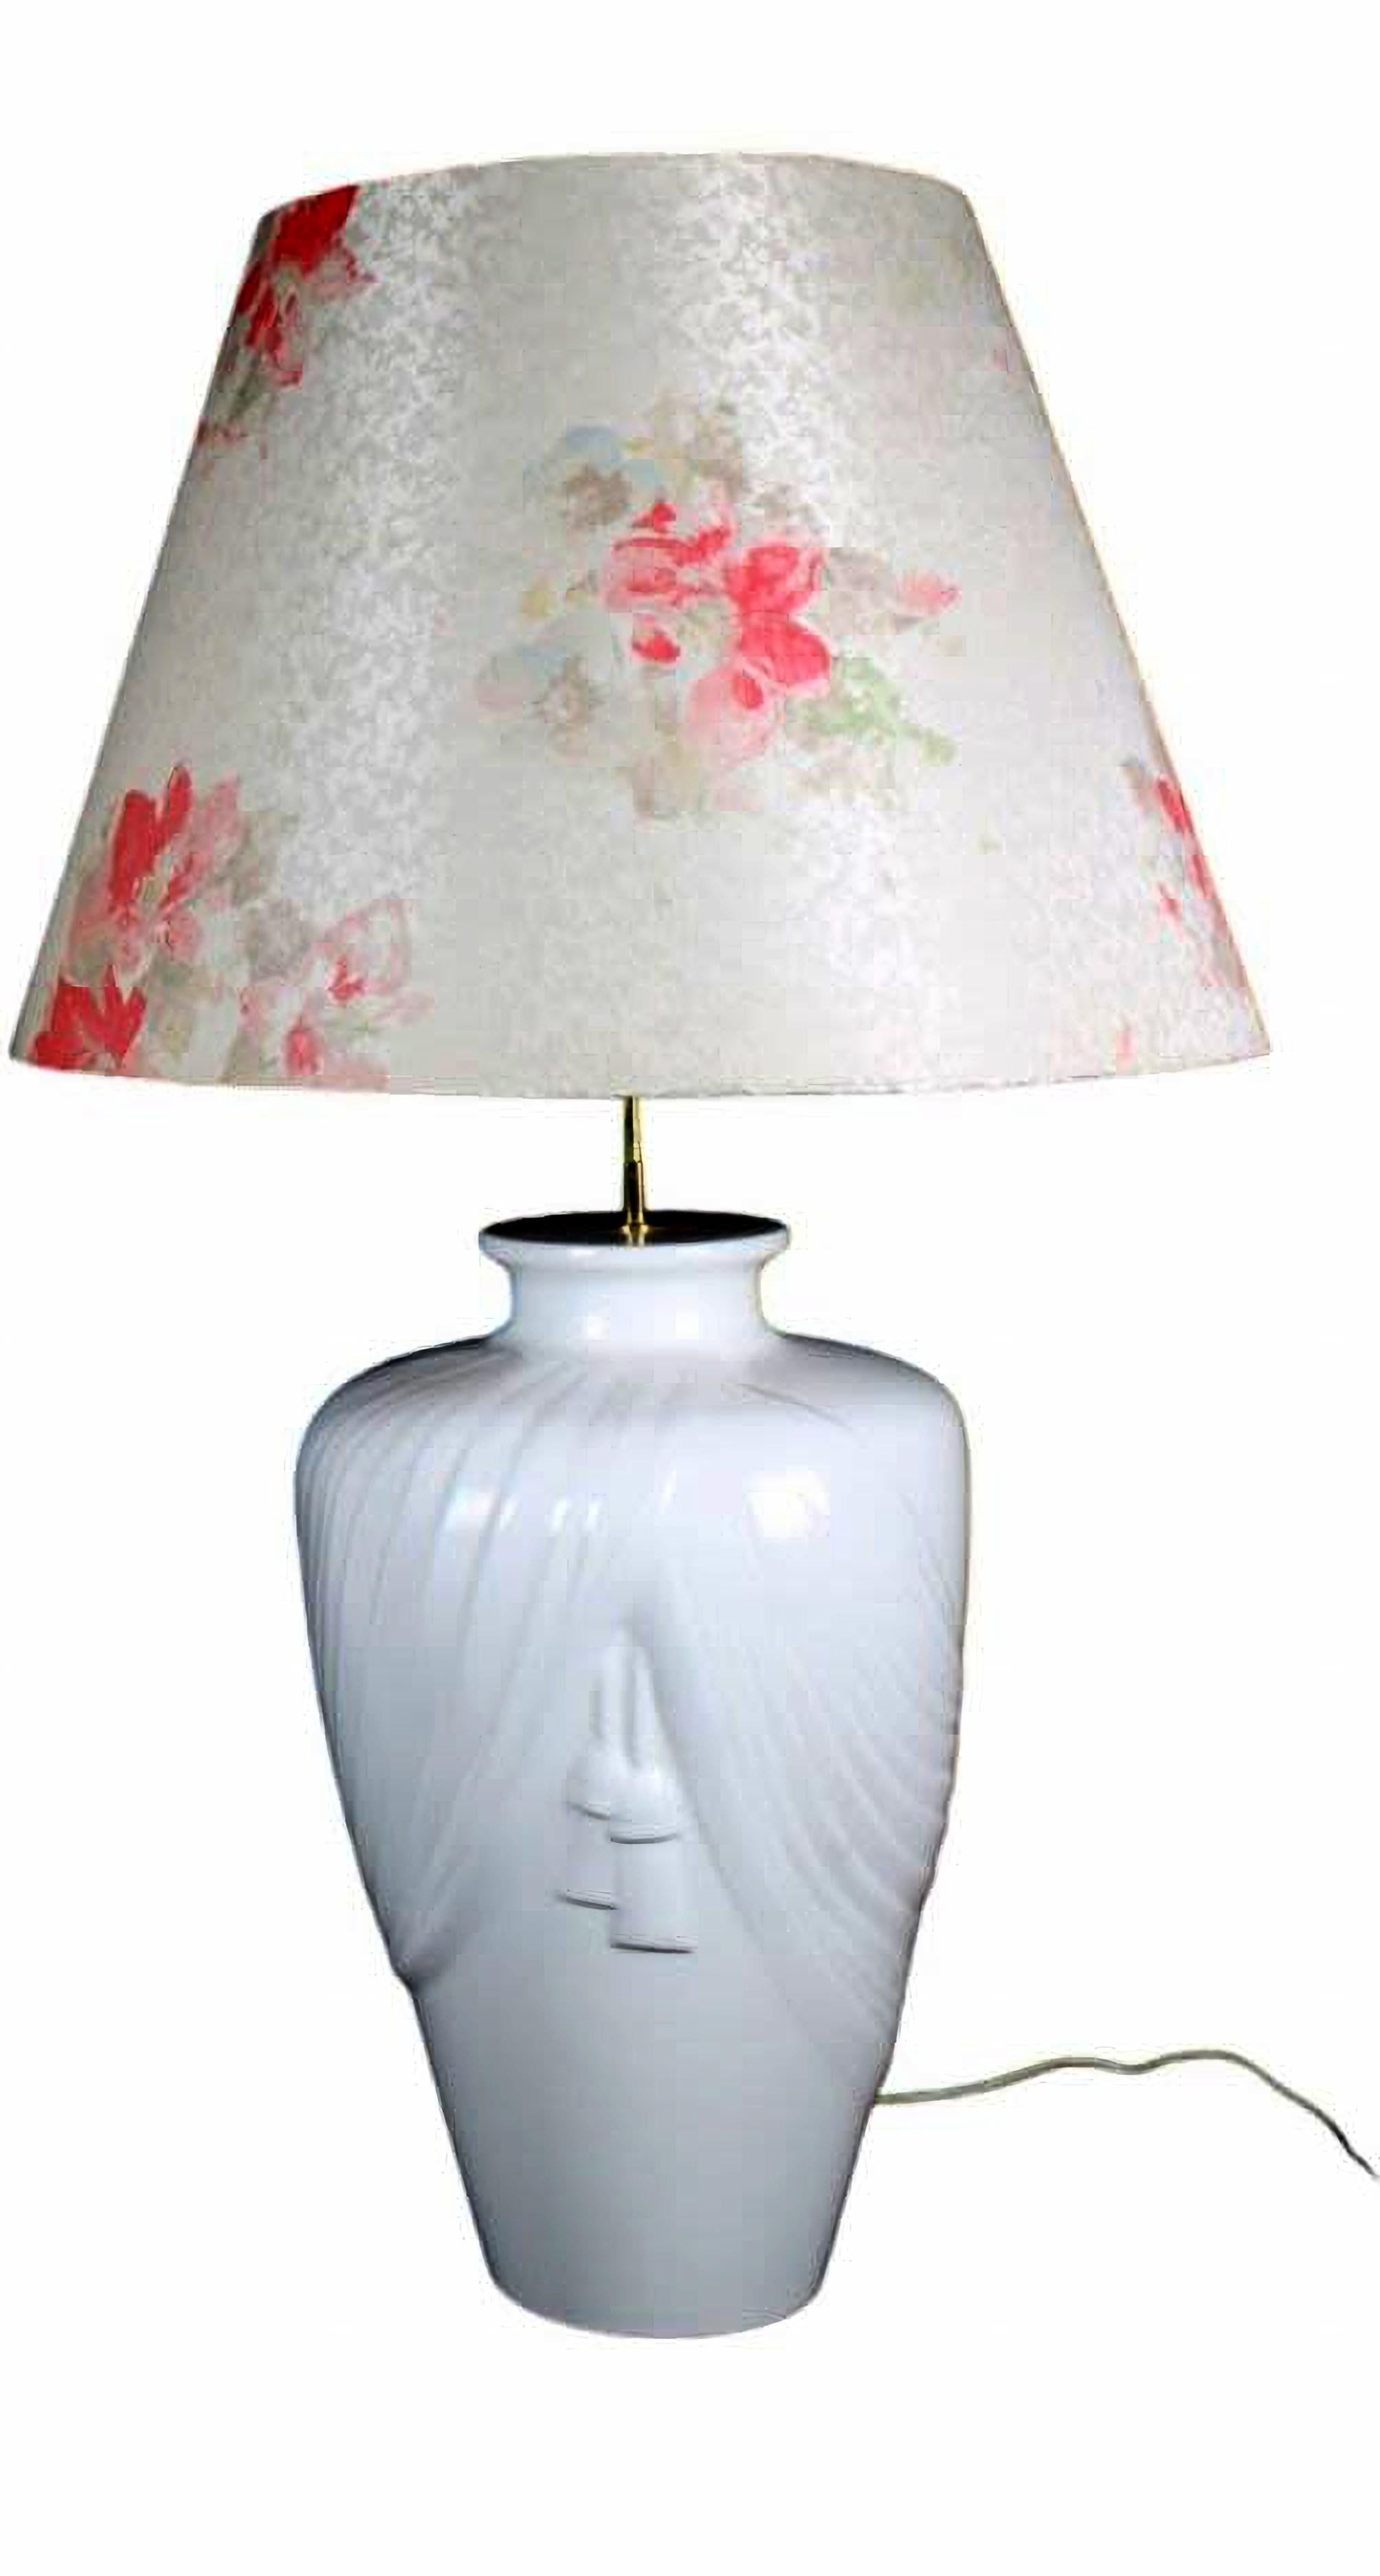 PAIR OF GREAT ITALIAN LIGHTS 20th century
in ceramic with modern Italian lampshades
h 103 x 59 x 100 cm
good conditions